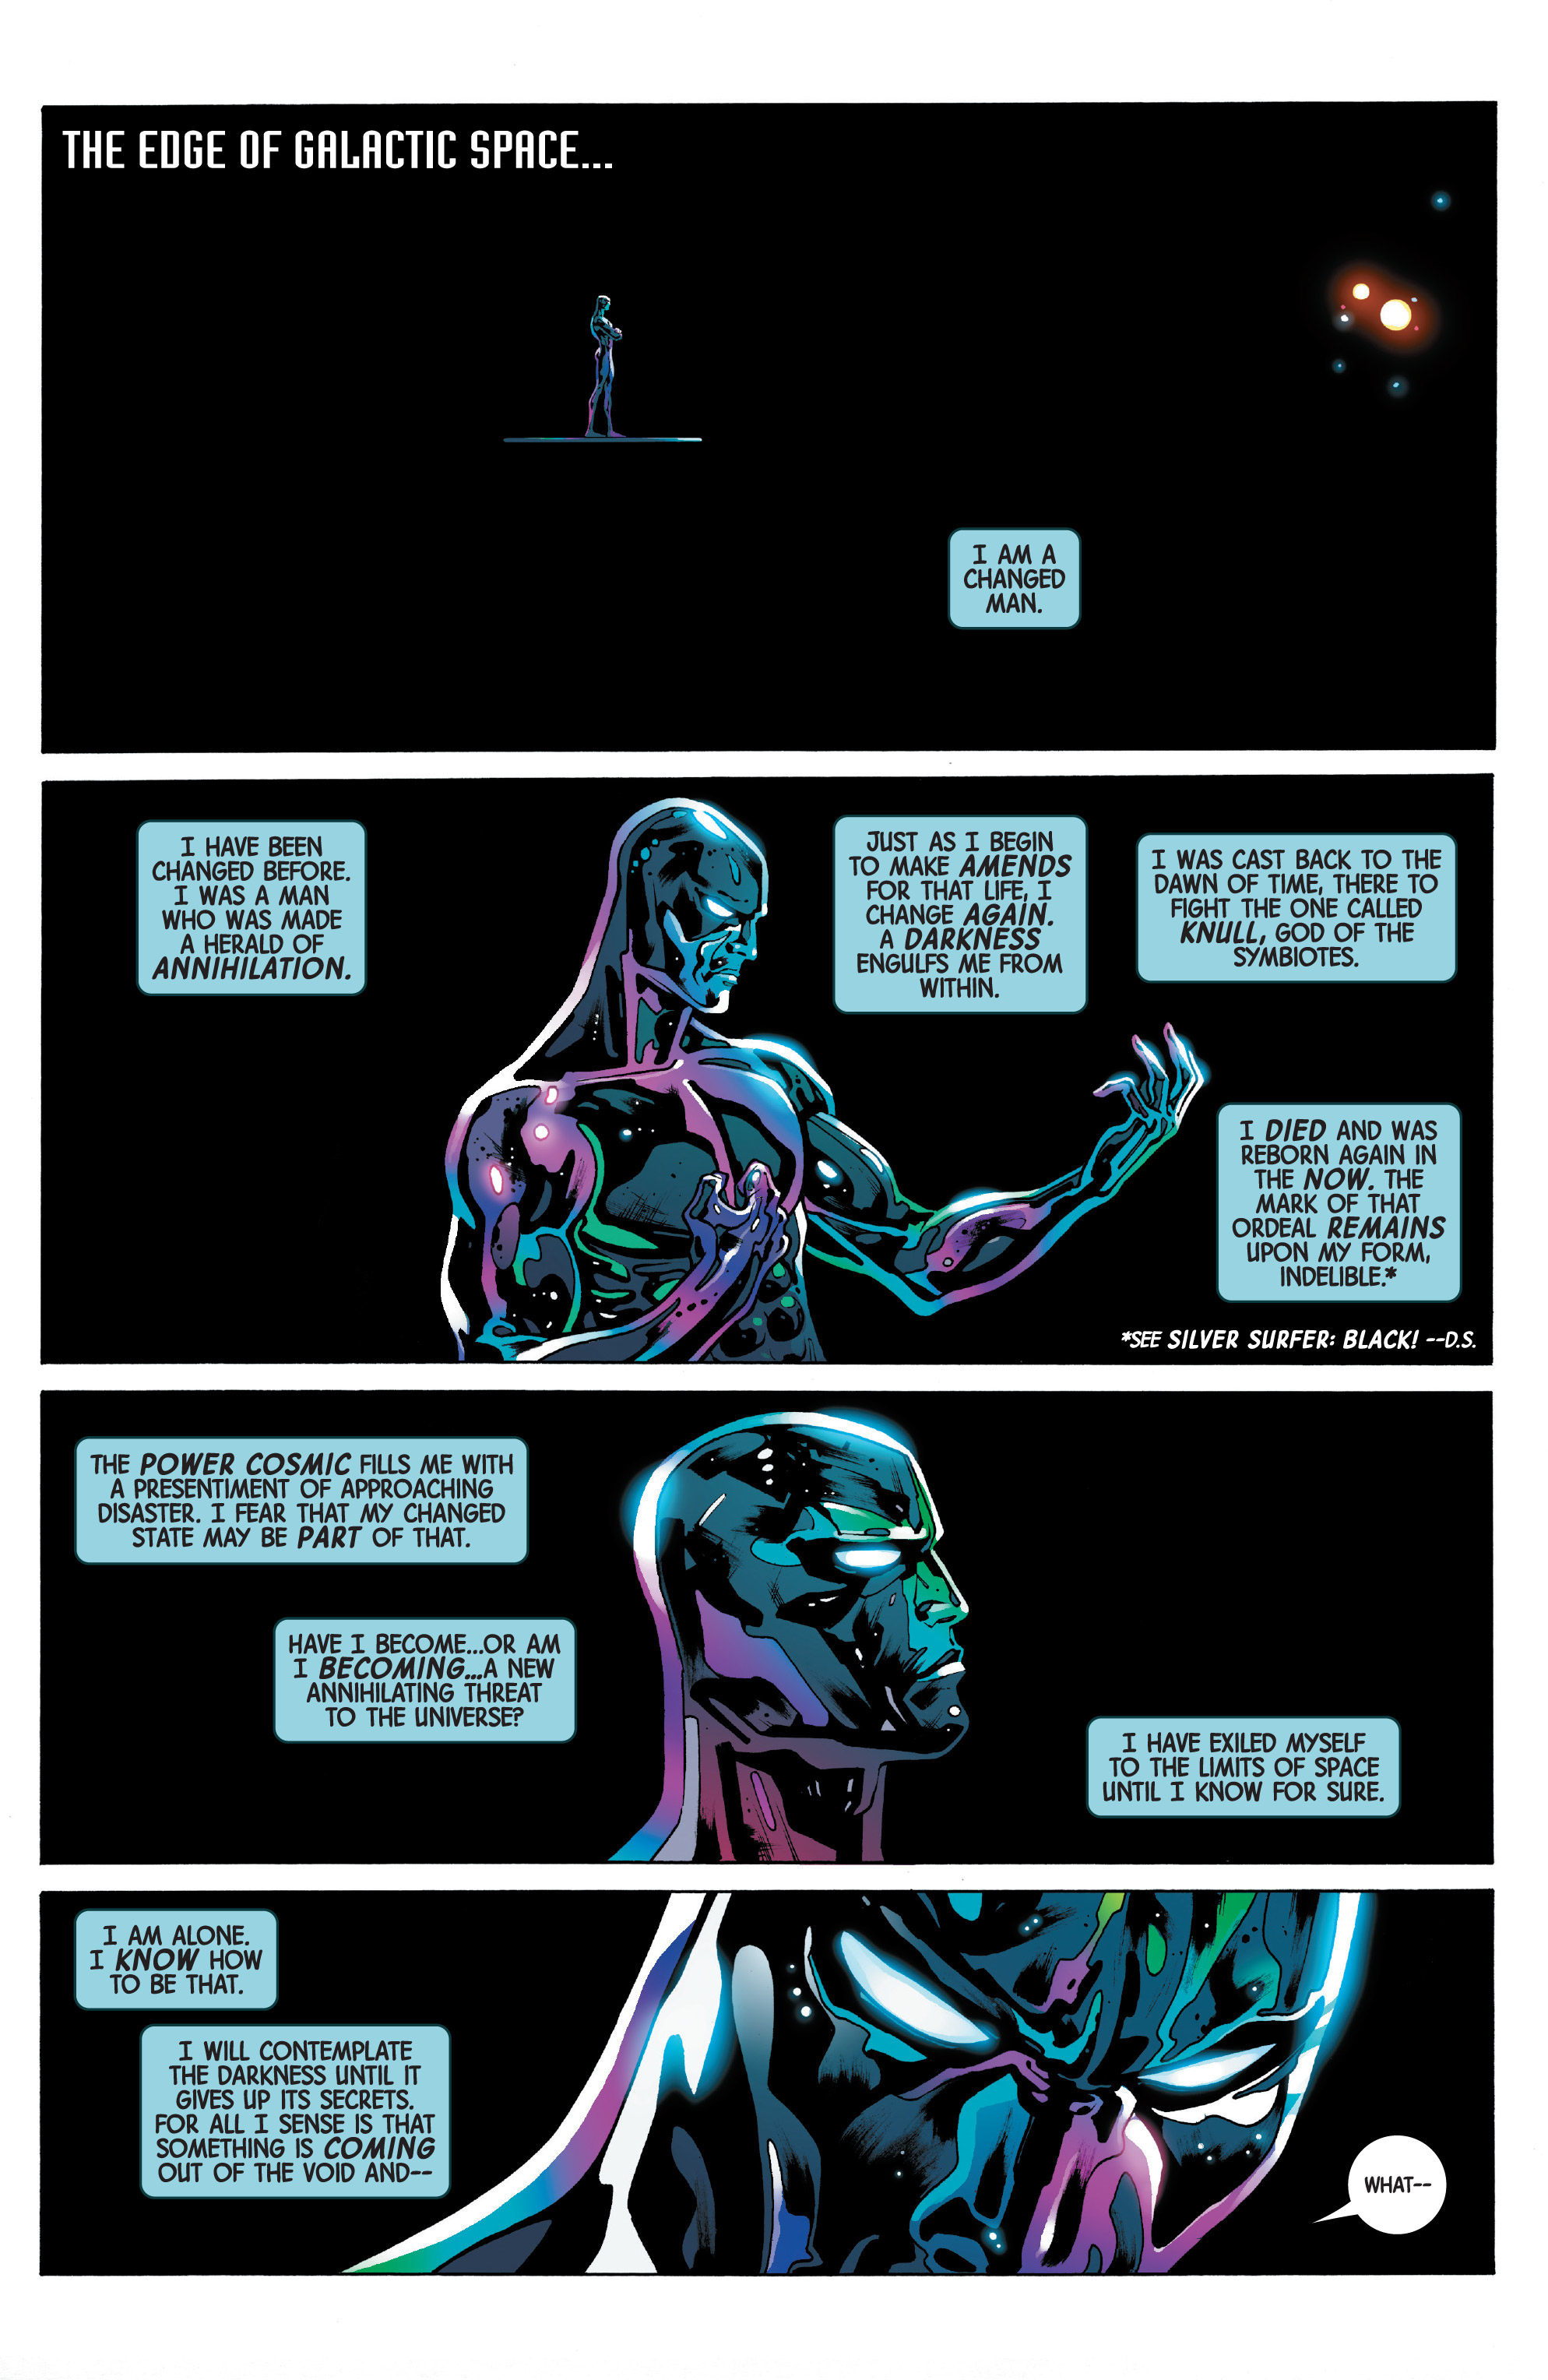 Annihilation - Scourge: Silver Surfer (2019): Chapter 1 - Page 3